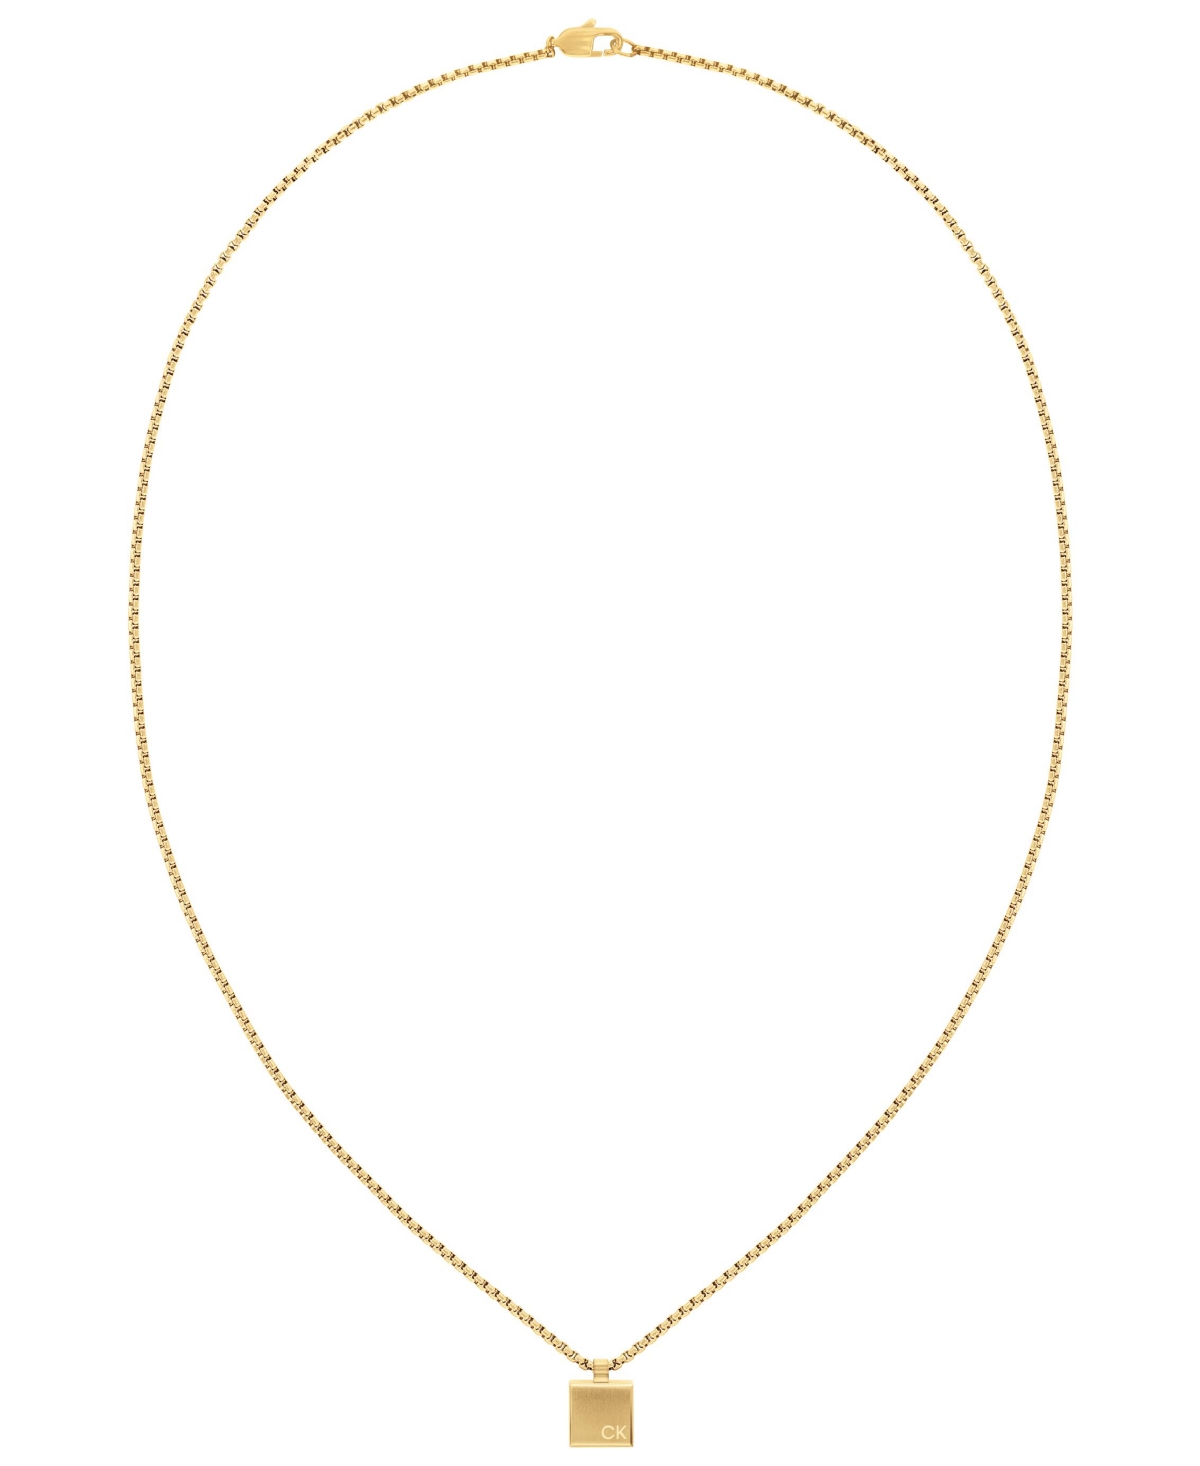 Calvin Klein Men's Gold-tone Stainless Steel Square Pendant Necklace